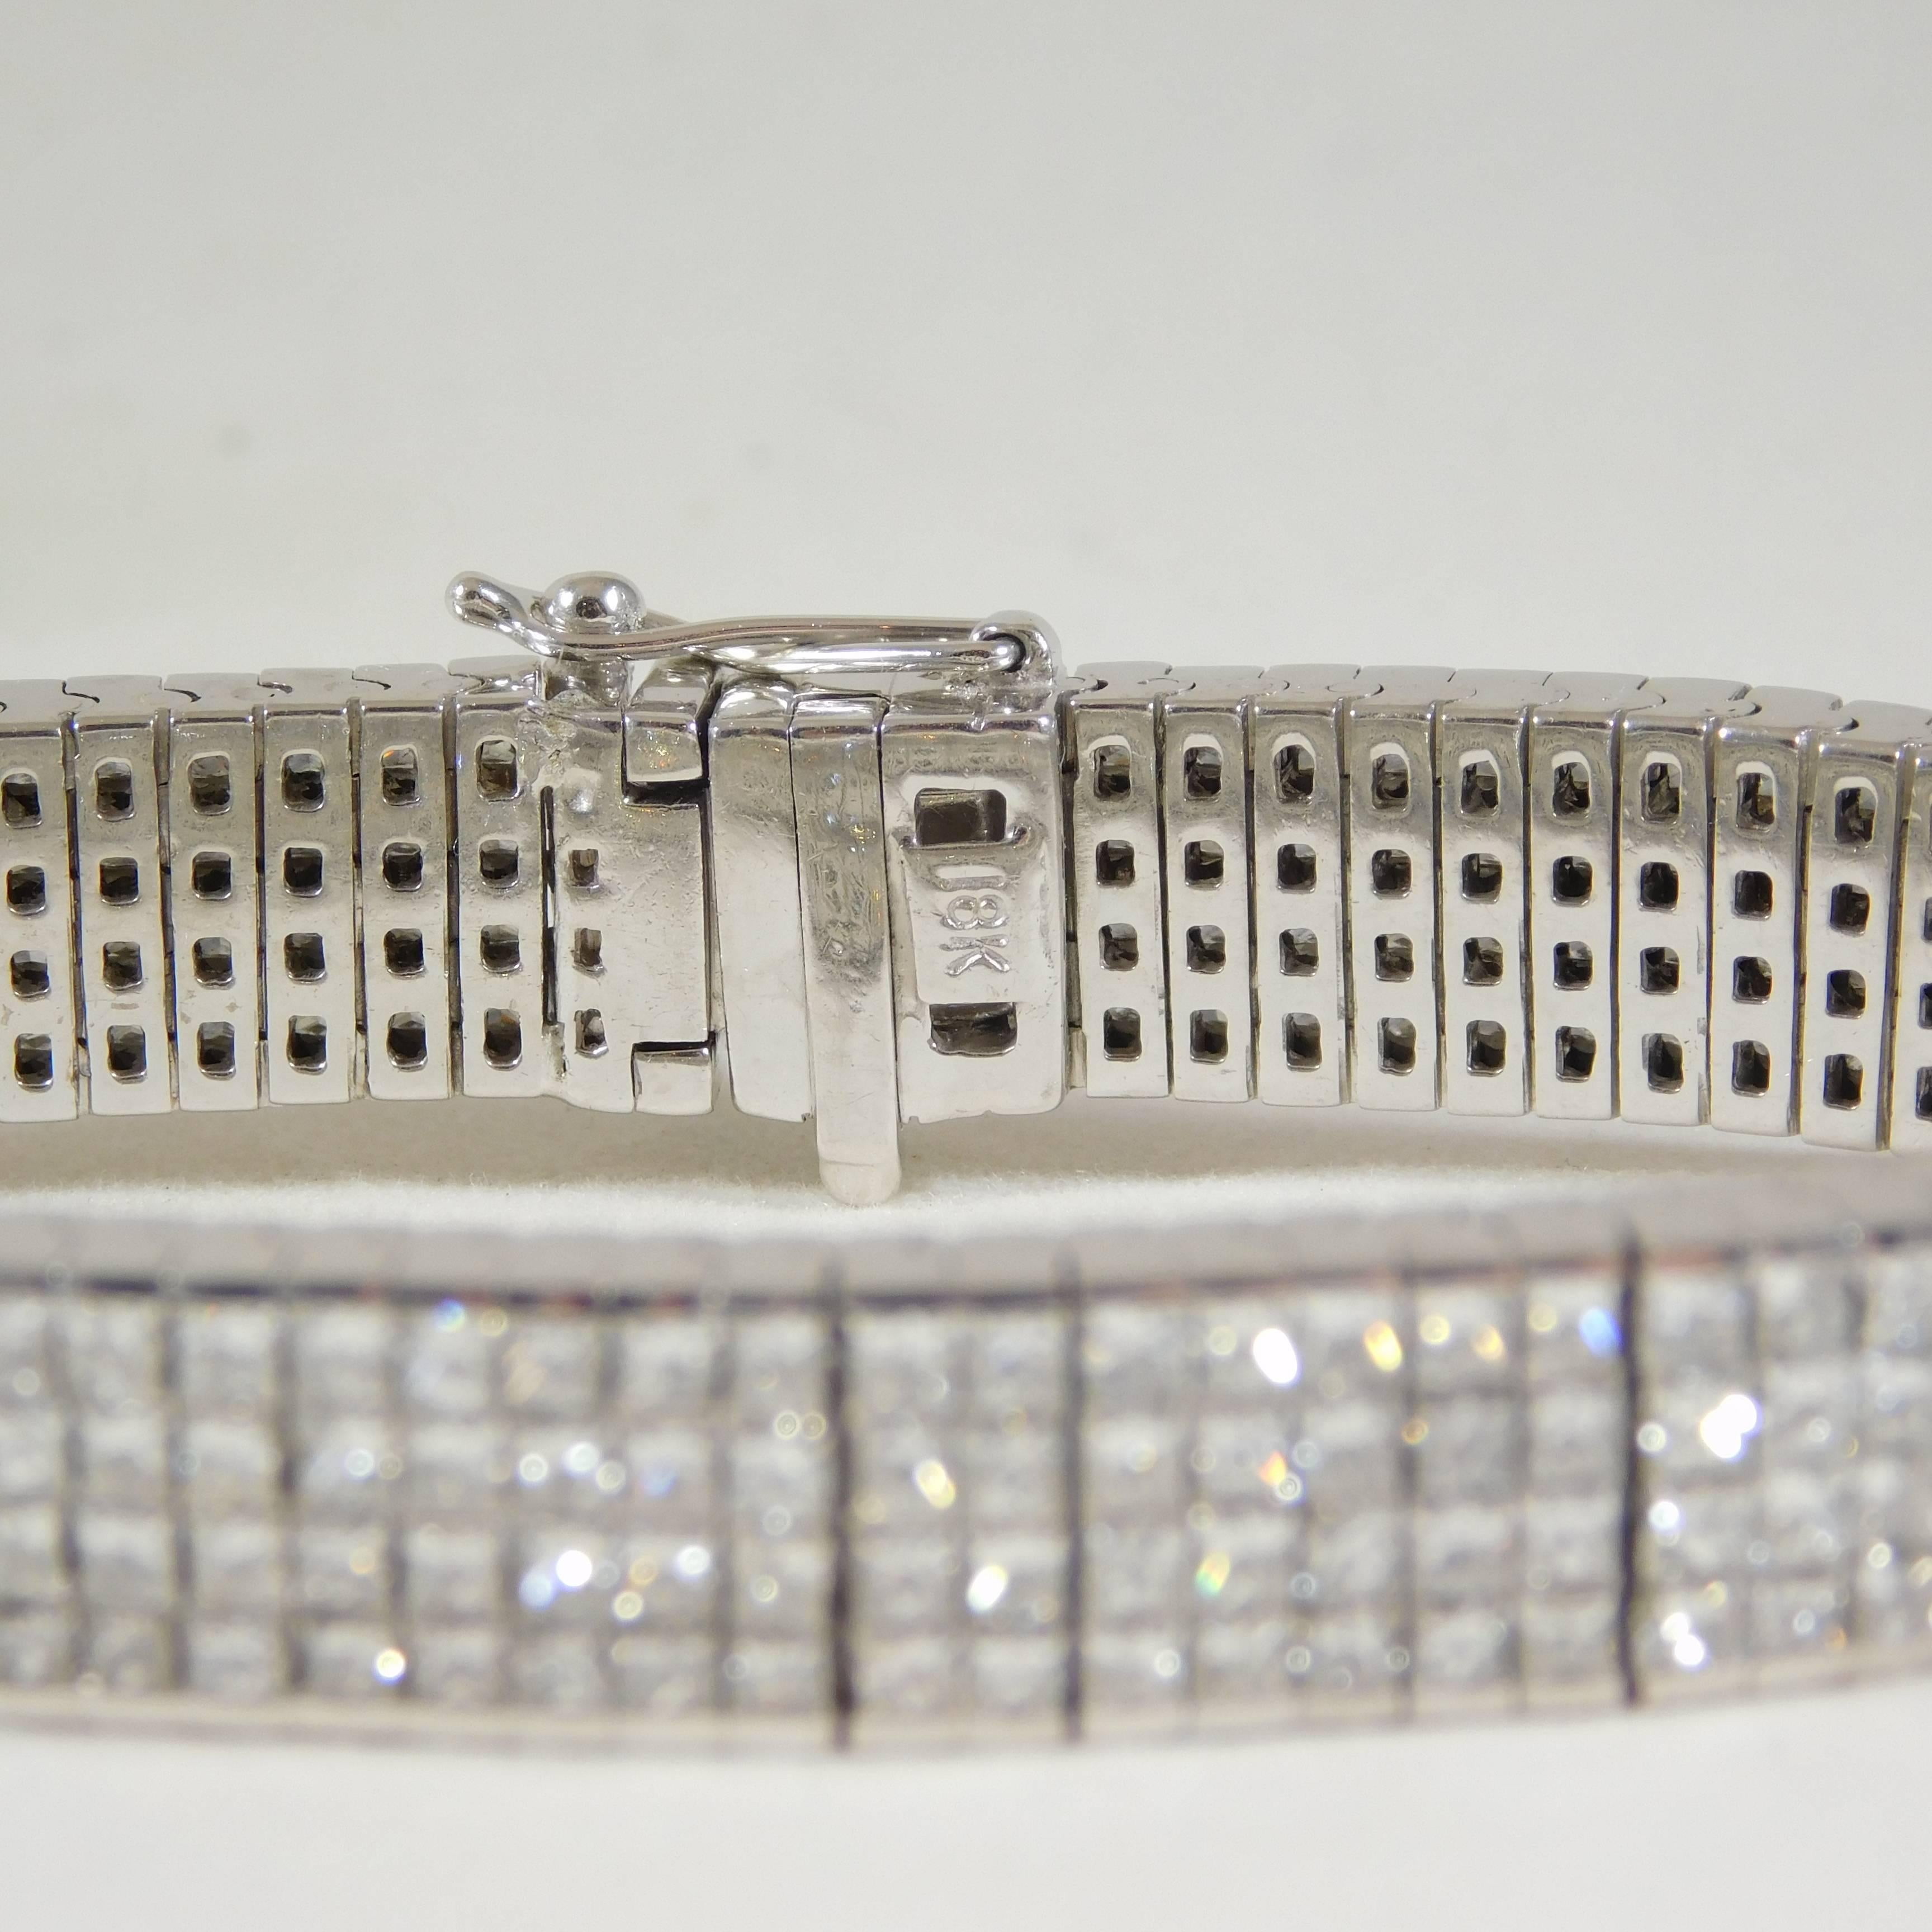 Hand-Made 18k White Gold and 11ct Diamond Bracelet


From a Wealthy Estate! This stunning handmade 18kt white gold diamond bracelet has over 350 dazzling princess cut diamonds.  The craftsmanship is extraordinary and a great example of a fine